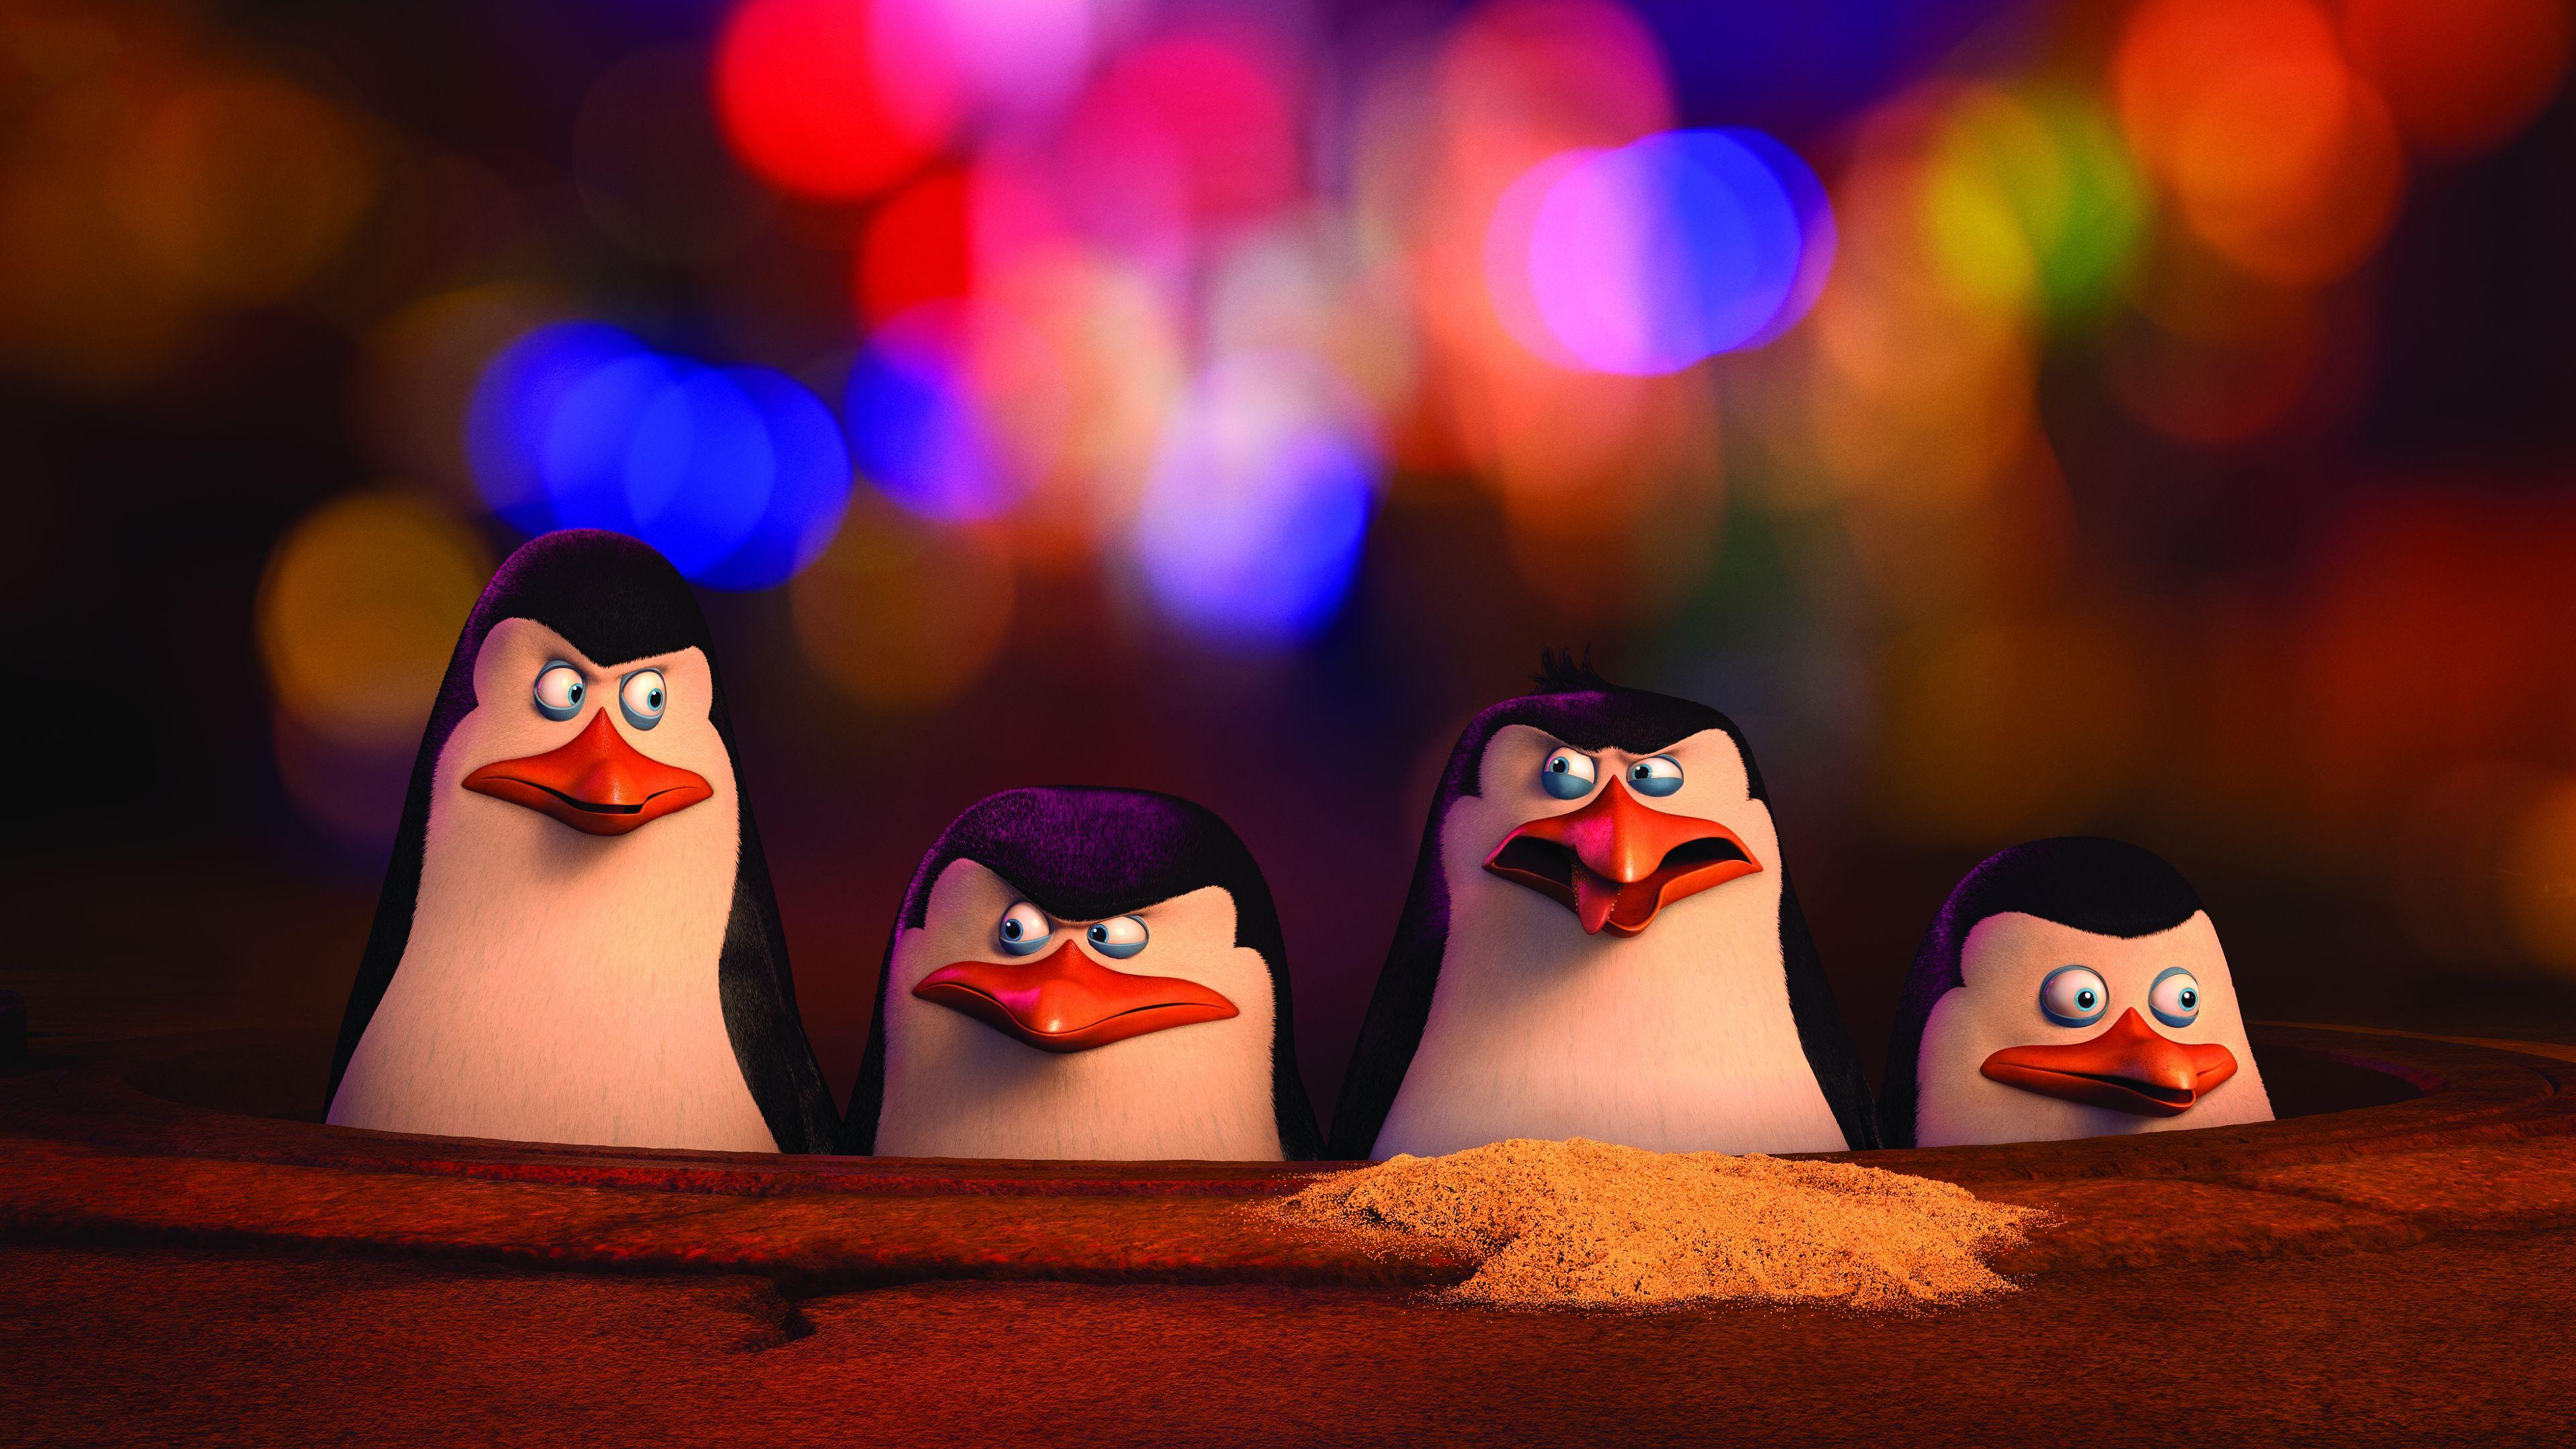 The Penguins of Madagascar Movie for 3840 x 2160 Ultra HD resolution